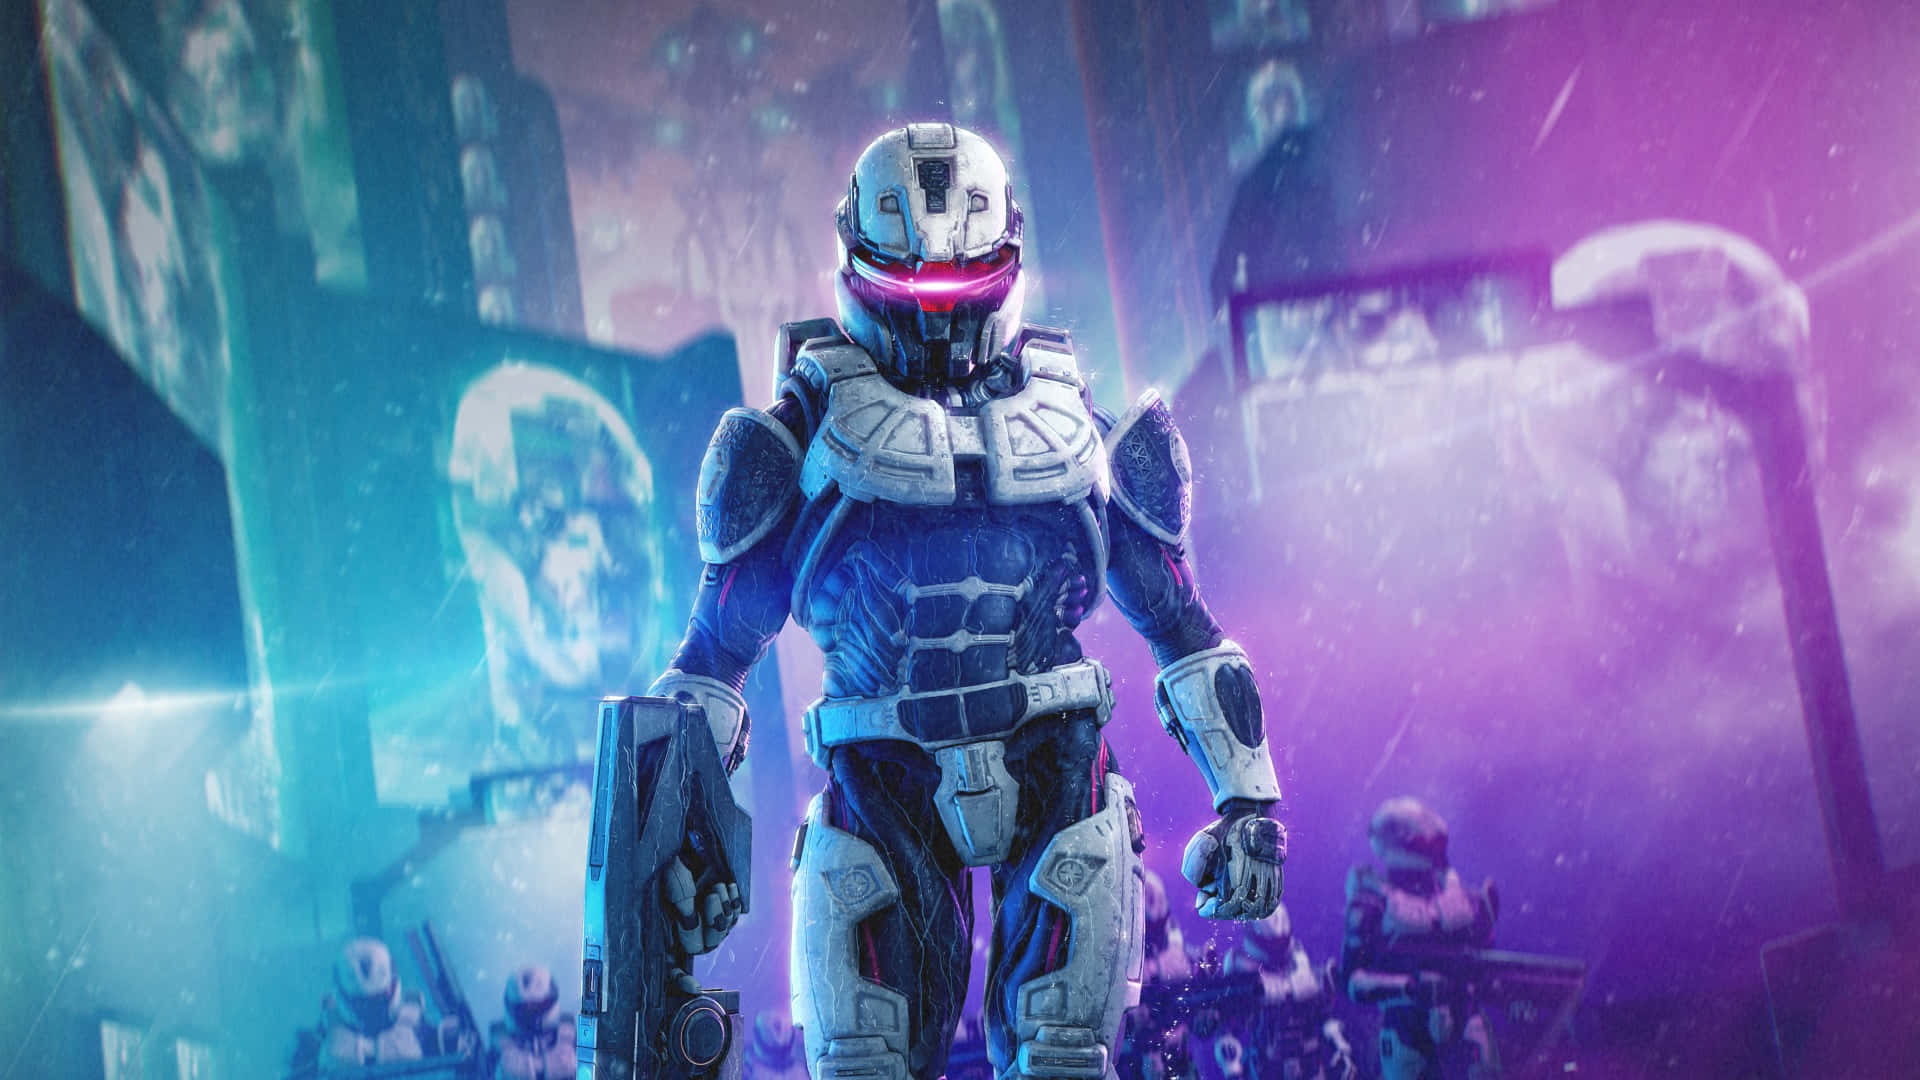 Master Chief on a New Adventure in Halo Infinite